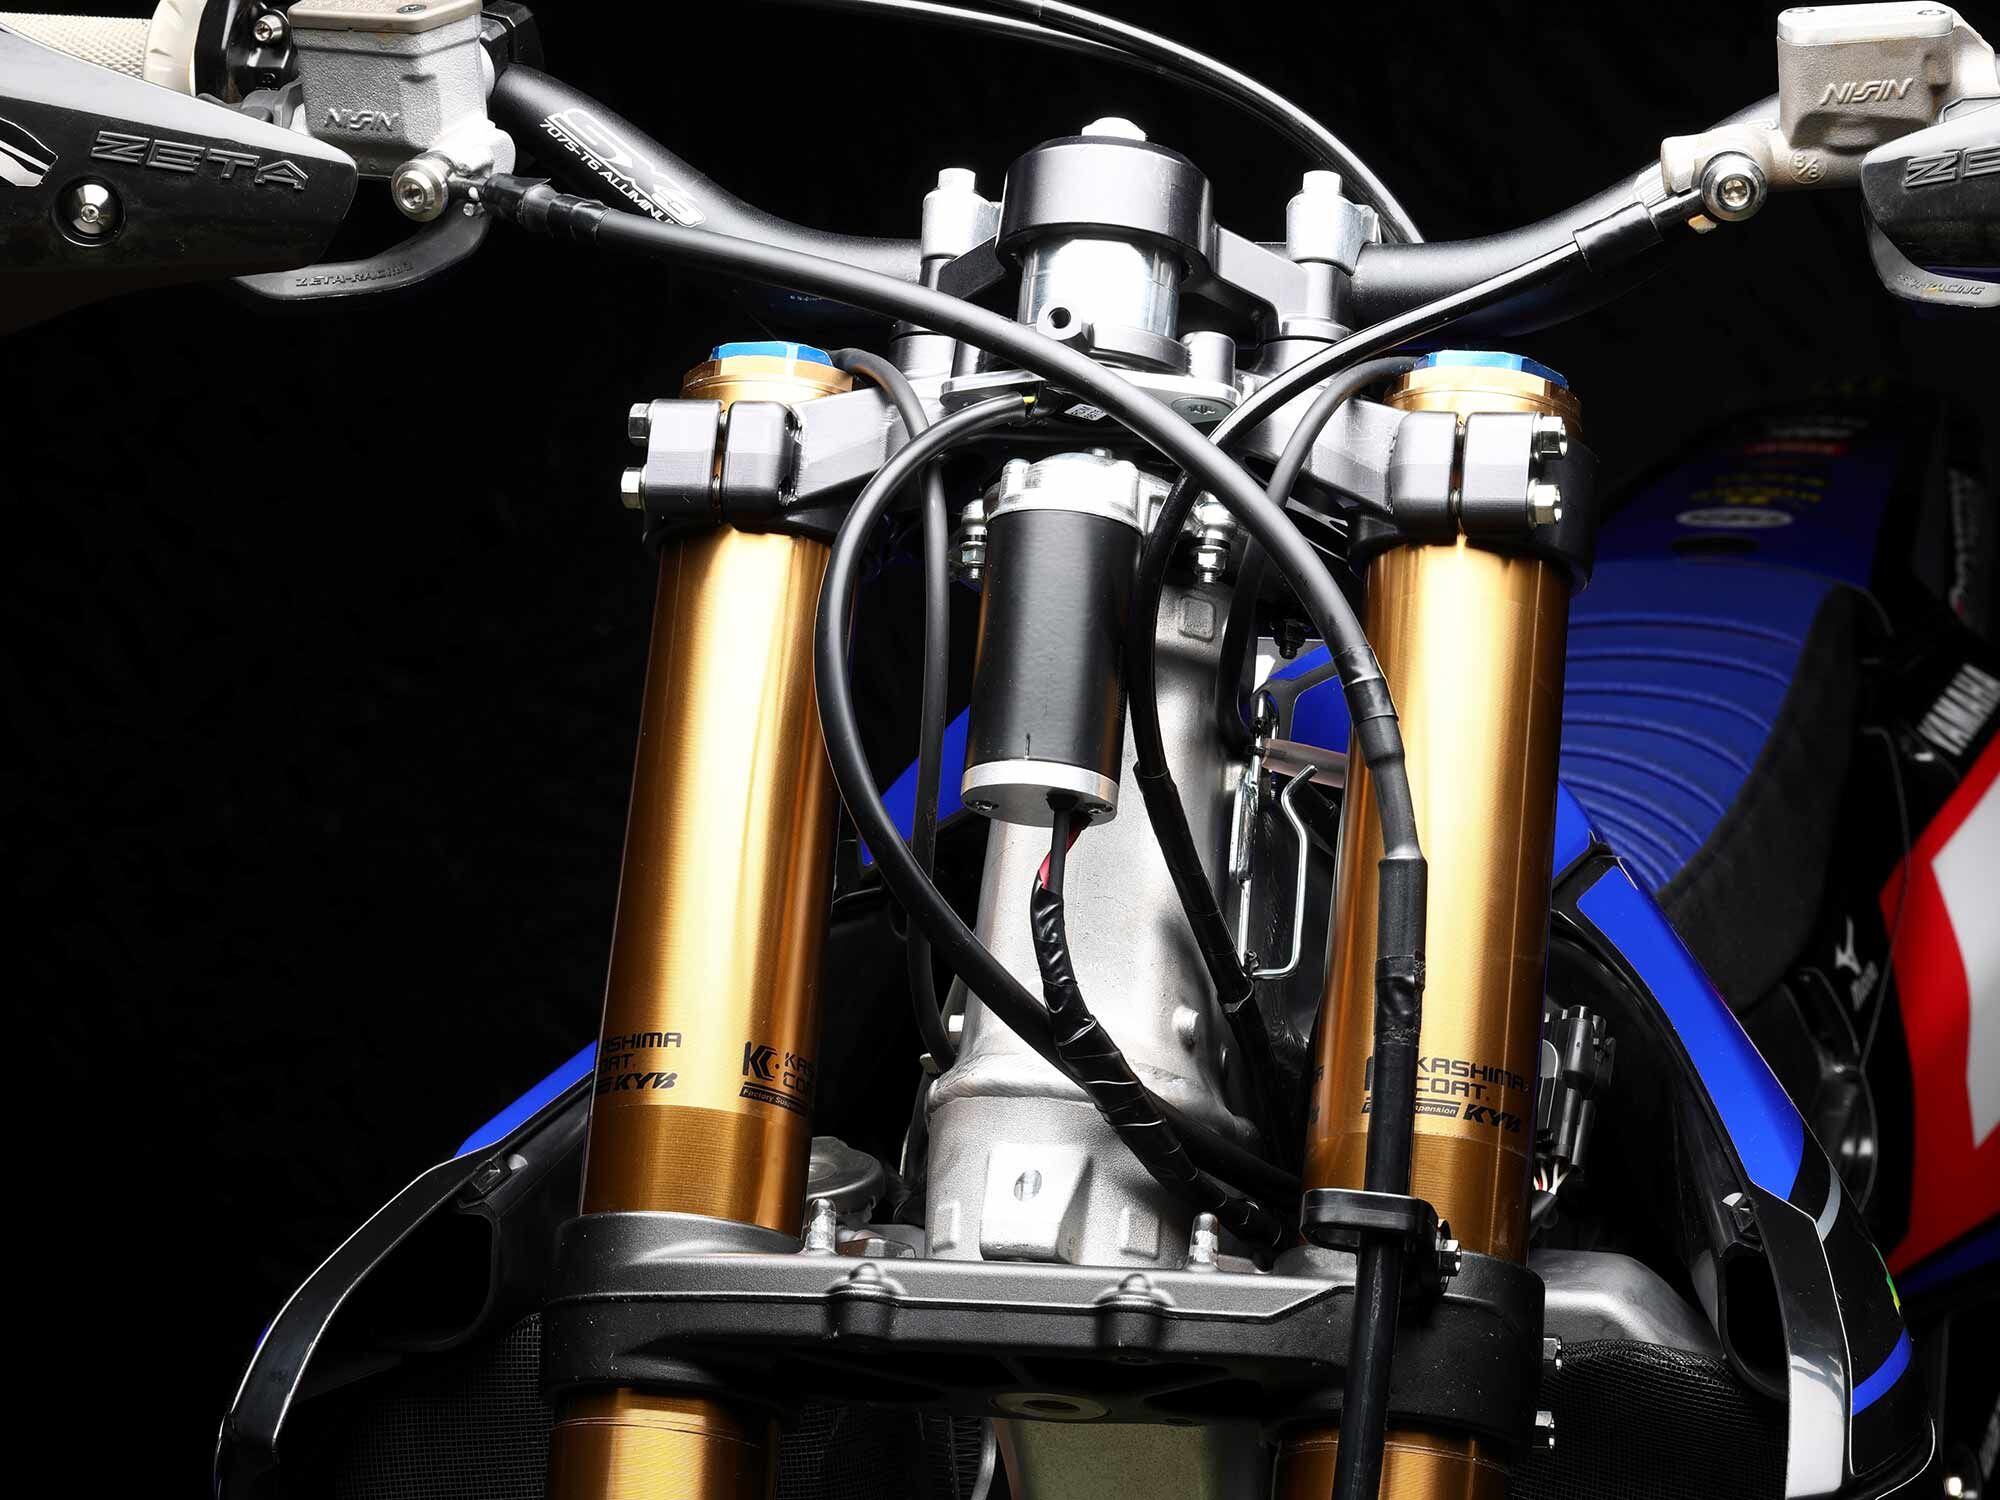 Yamaha’s new electric power steering system is currently in use on some of its works motocrossers.